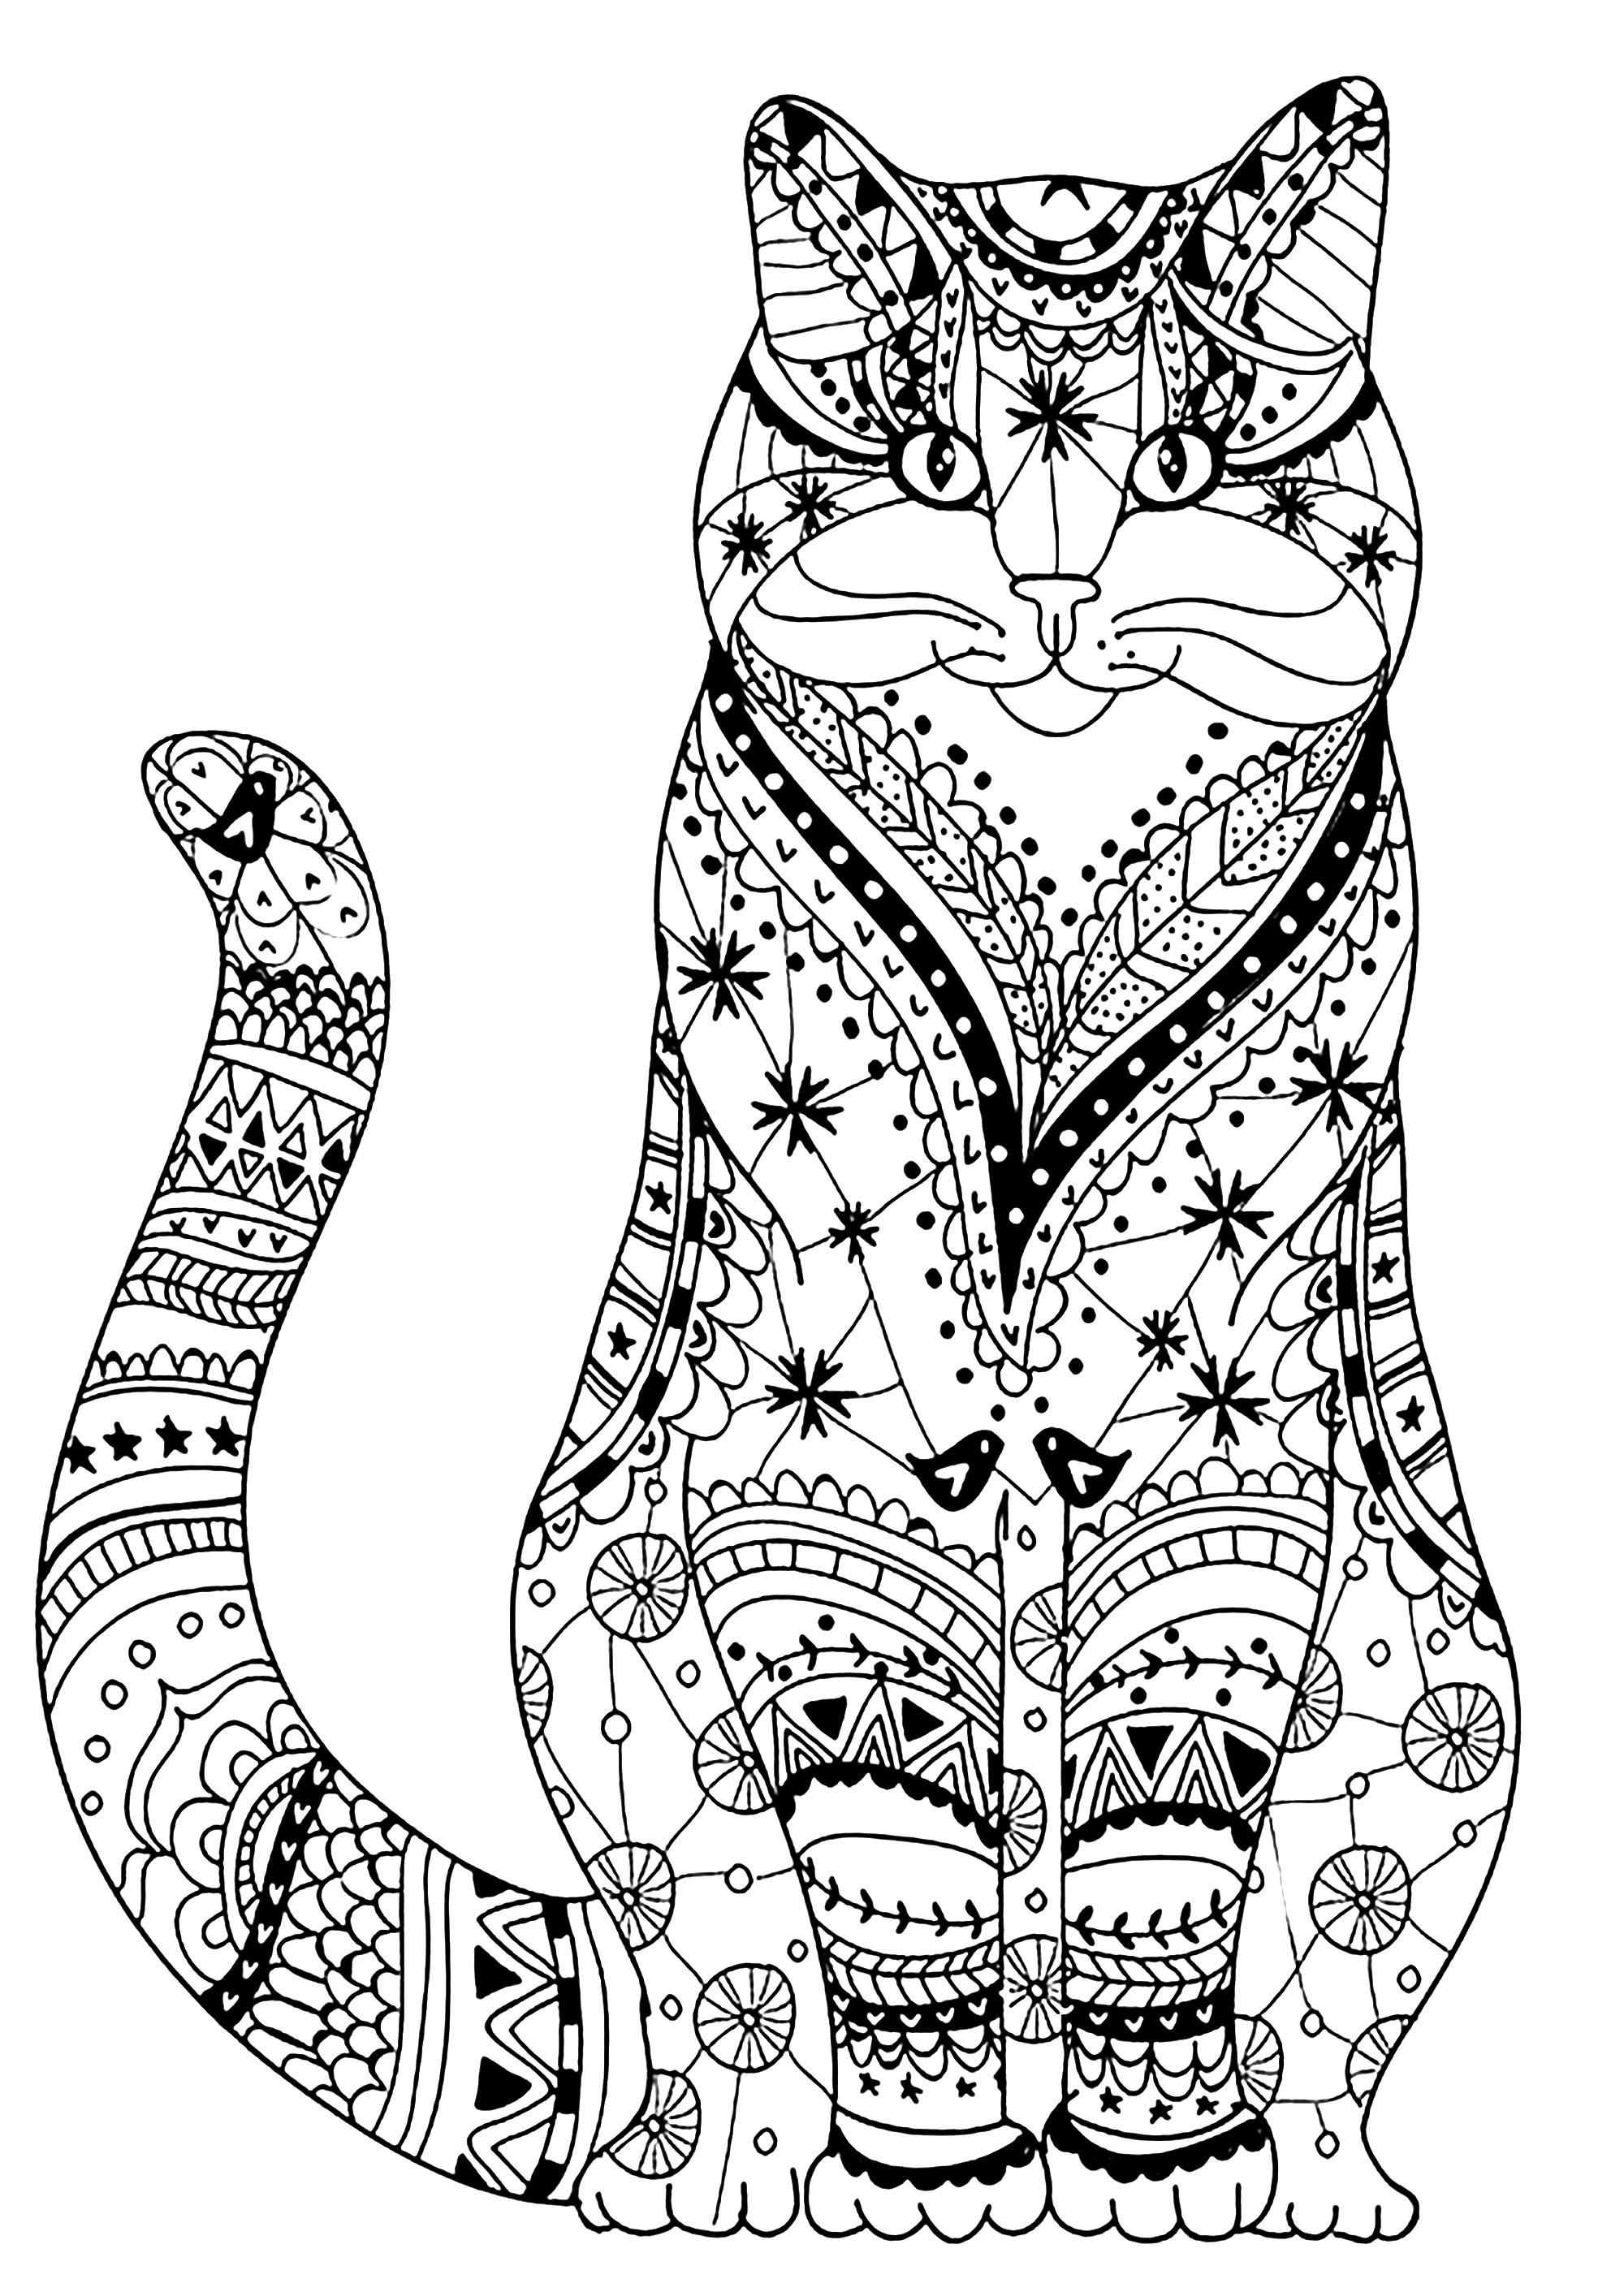 Very wise cat - Cats Adult Coloring Pages